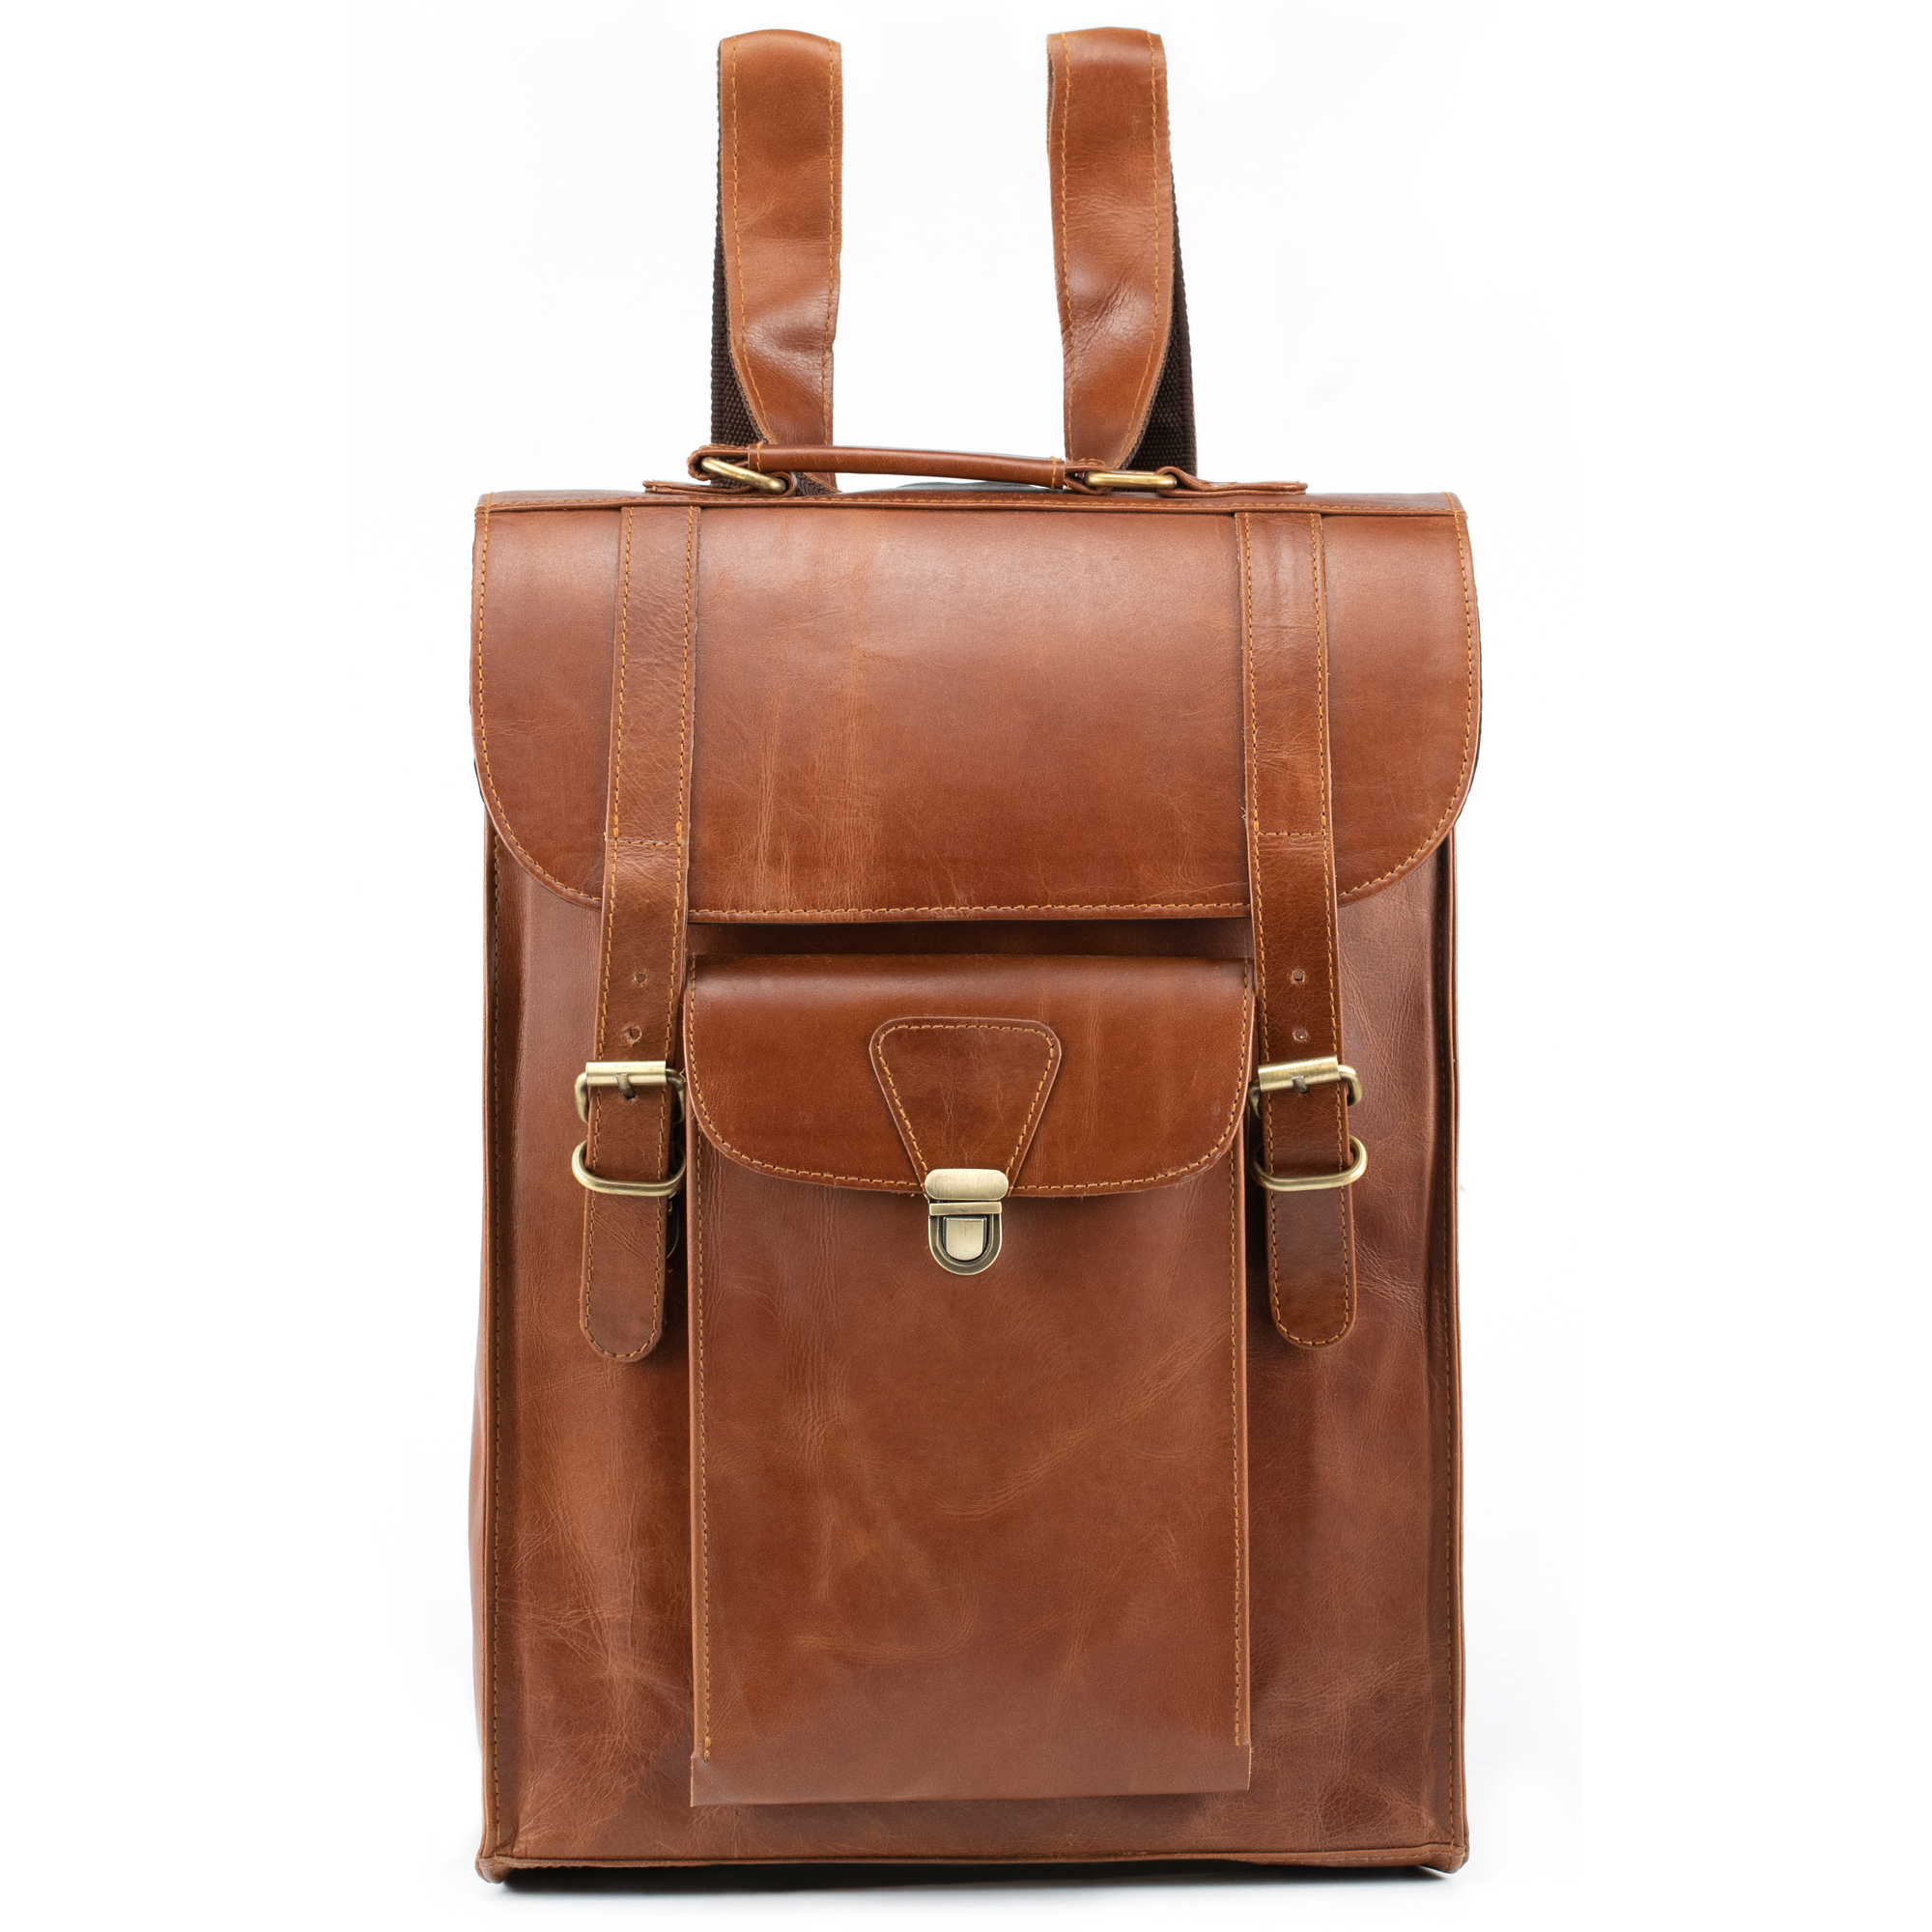 Handmade World Light Brown Vertical Convertible leather Messenger Backpack with front pocket and 2 buckle closure